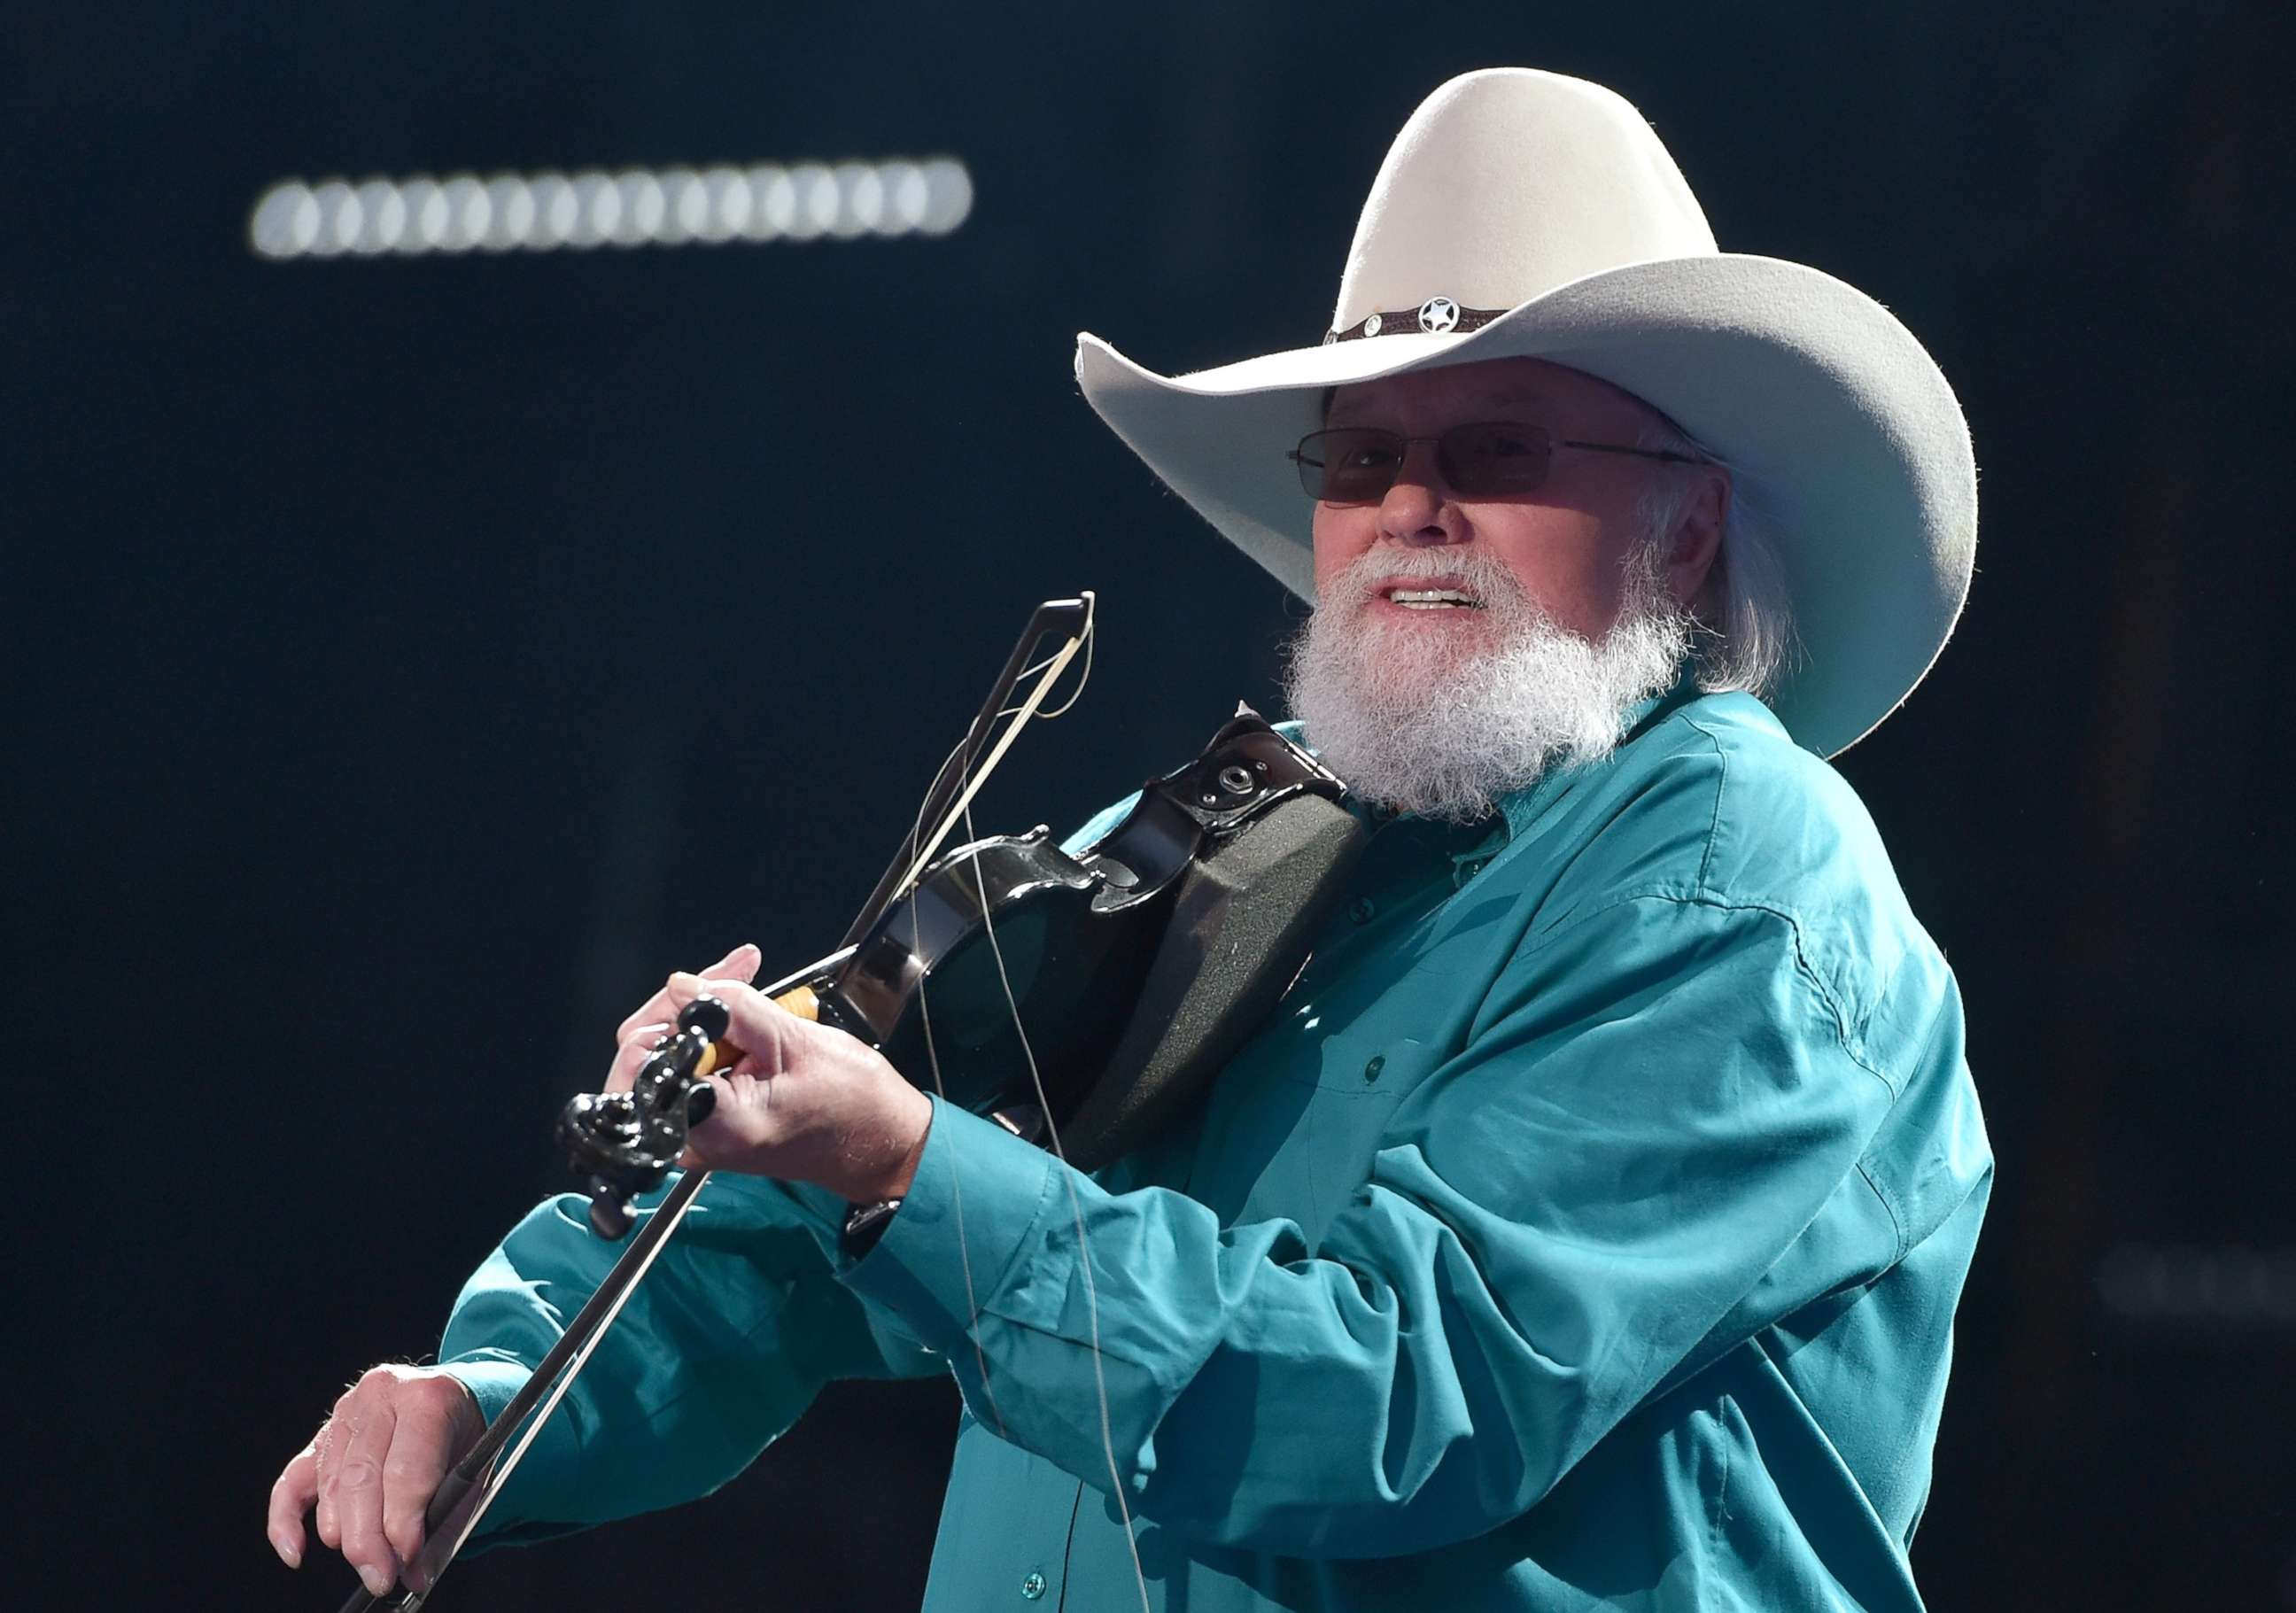 PHOTO: Musician Charlie Daniels performs onstage during 2016 CMA Festival, June 9, 2016 in Nashville, Tennessee.